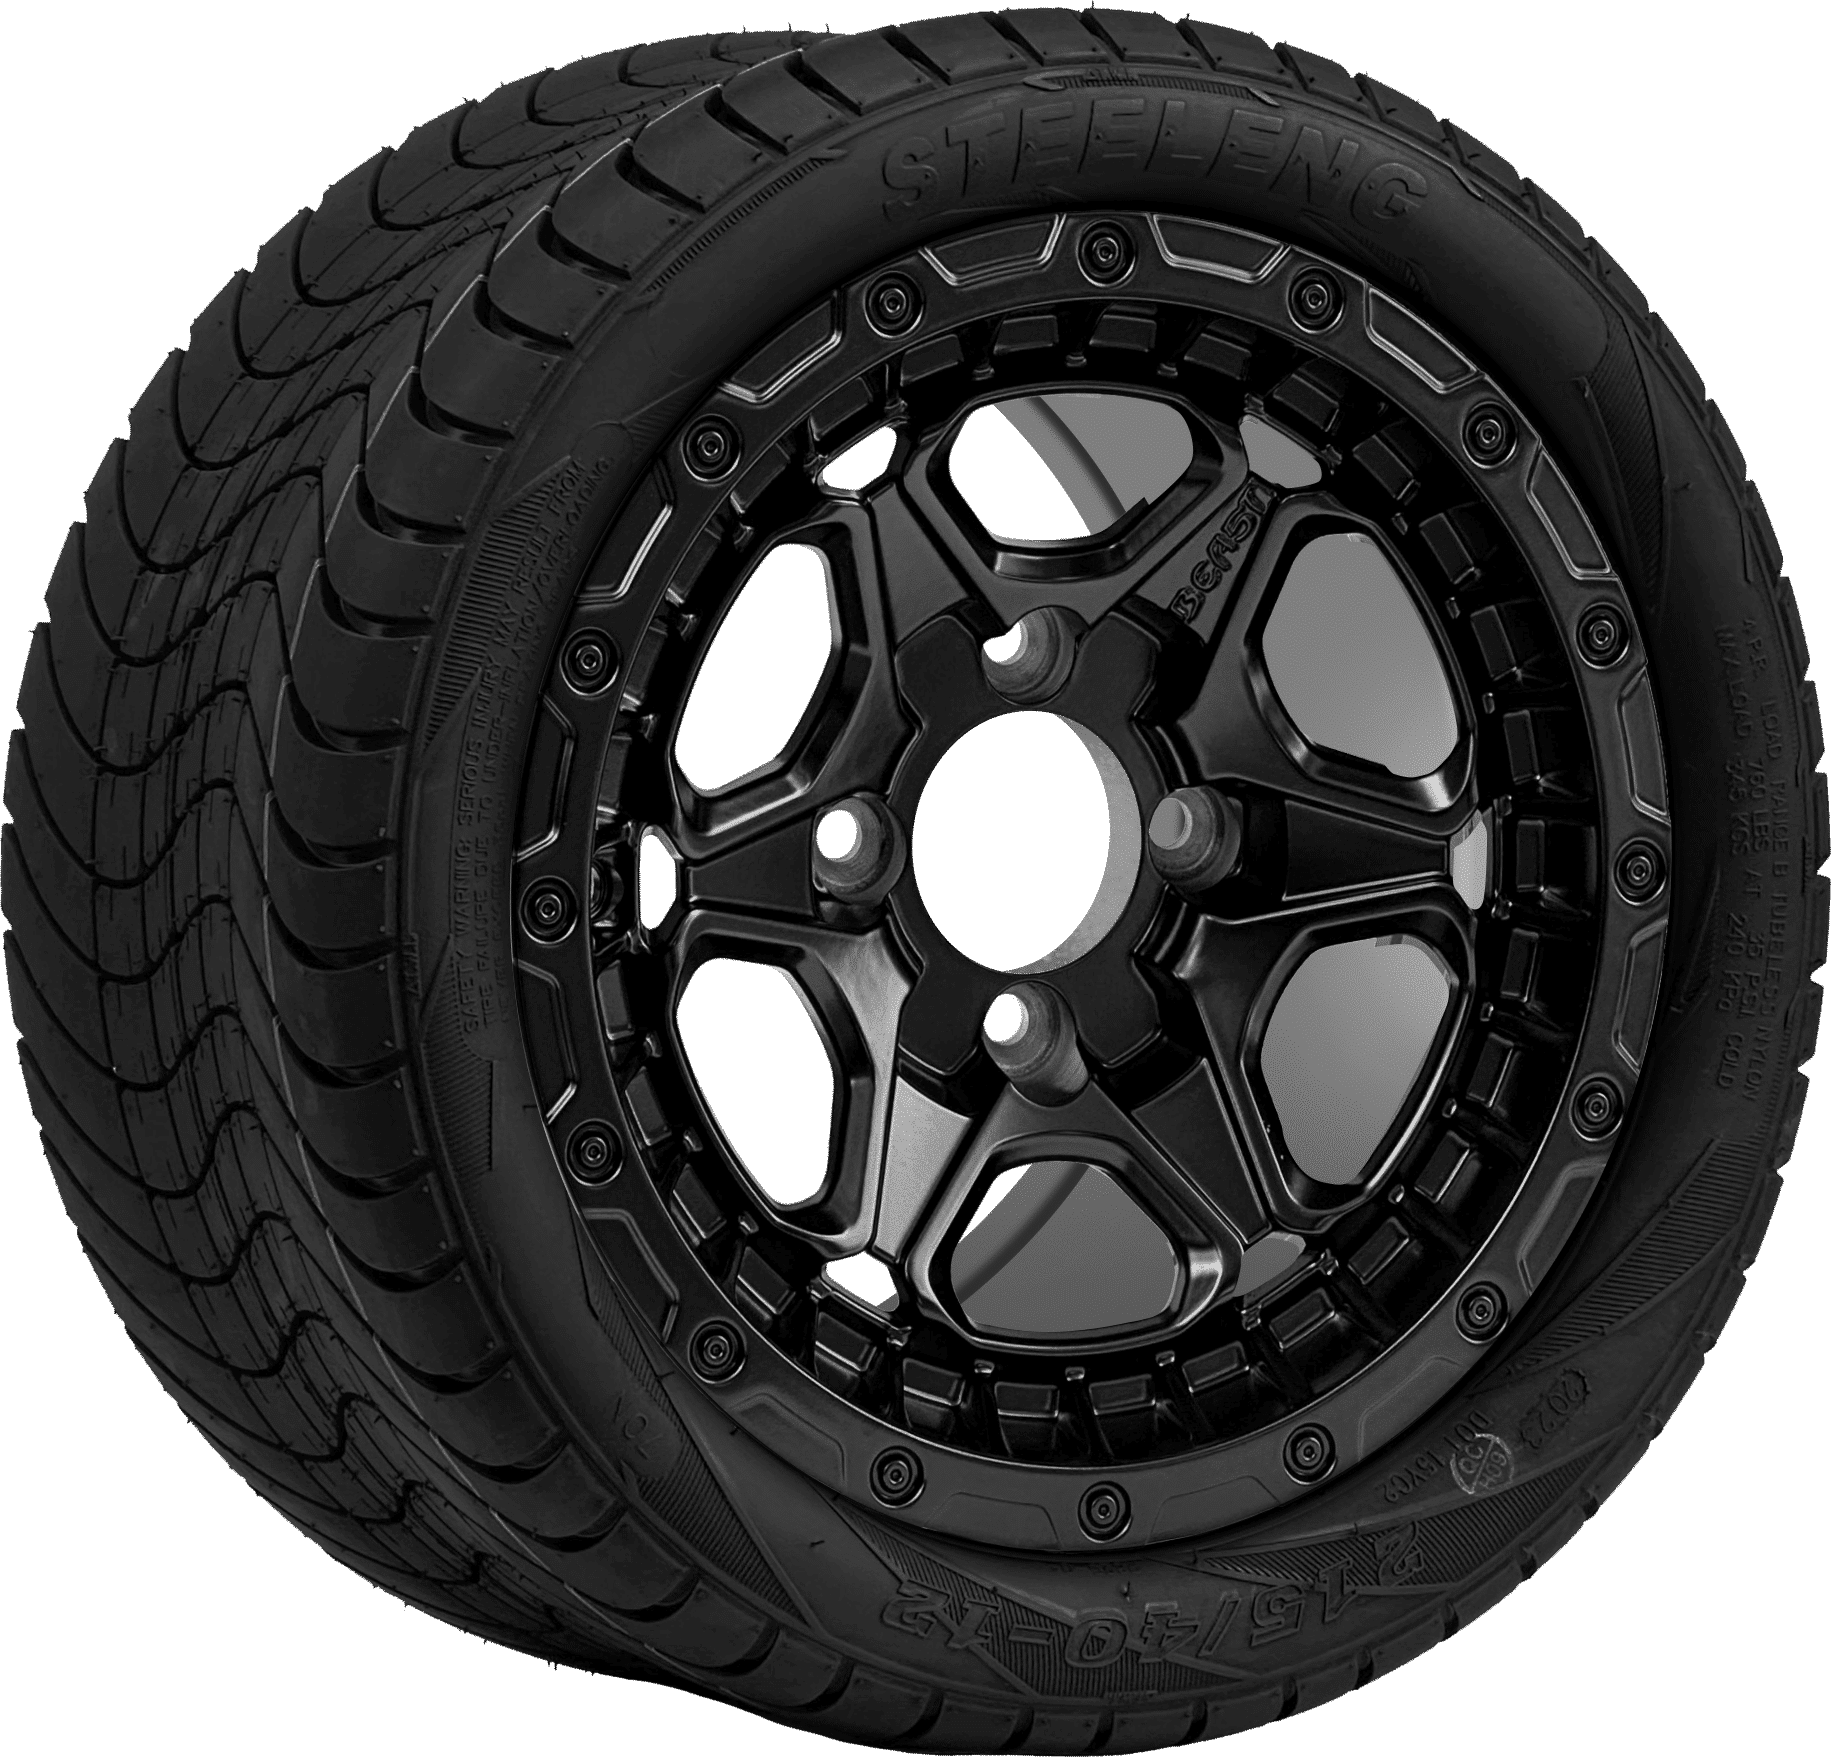 BNDL-TR1211-WH1265-CC0024-LN0003 12″ GRIZZLY MATTE BLACK WHEEL – ALUMINUM ALLOY / STEELENG 215/40-12 LOW PROFILE TIRE DOT APPROVED